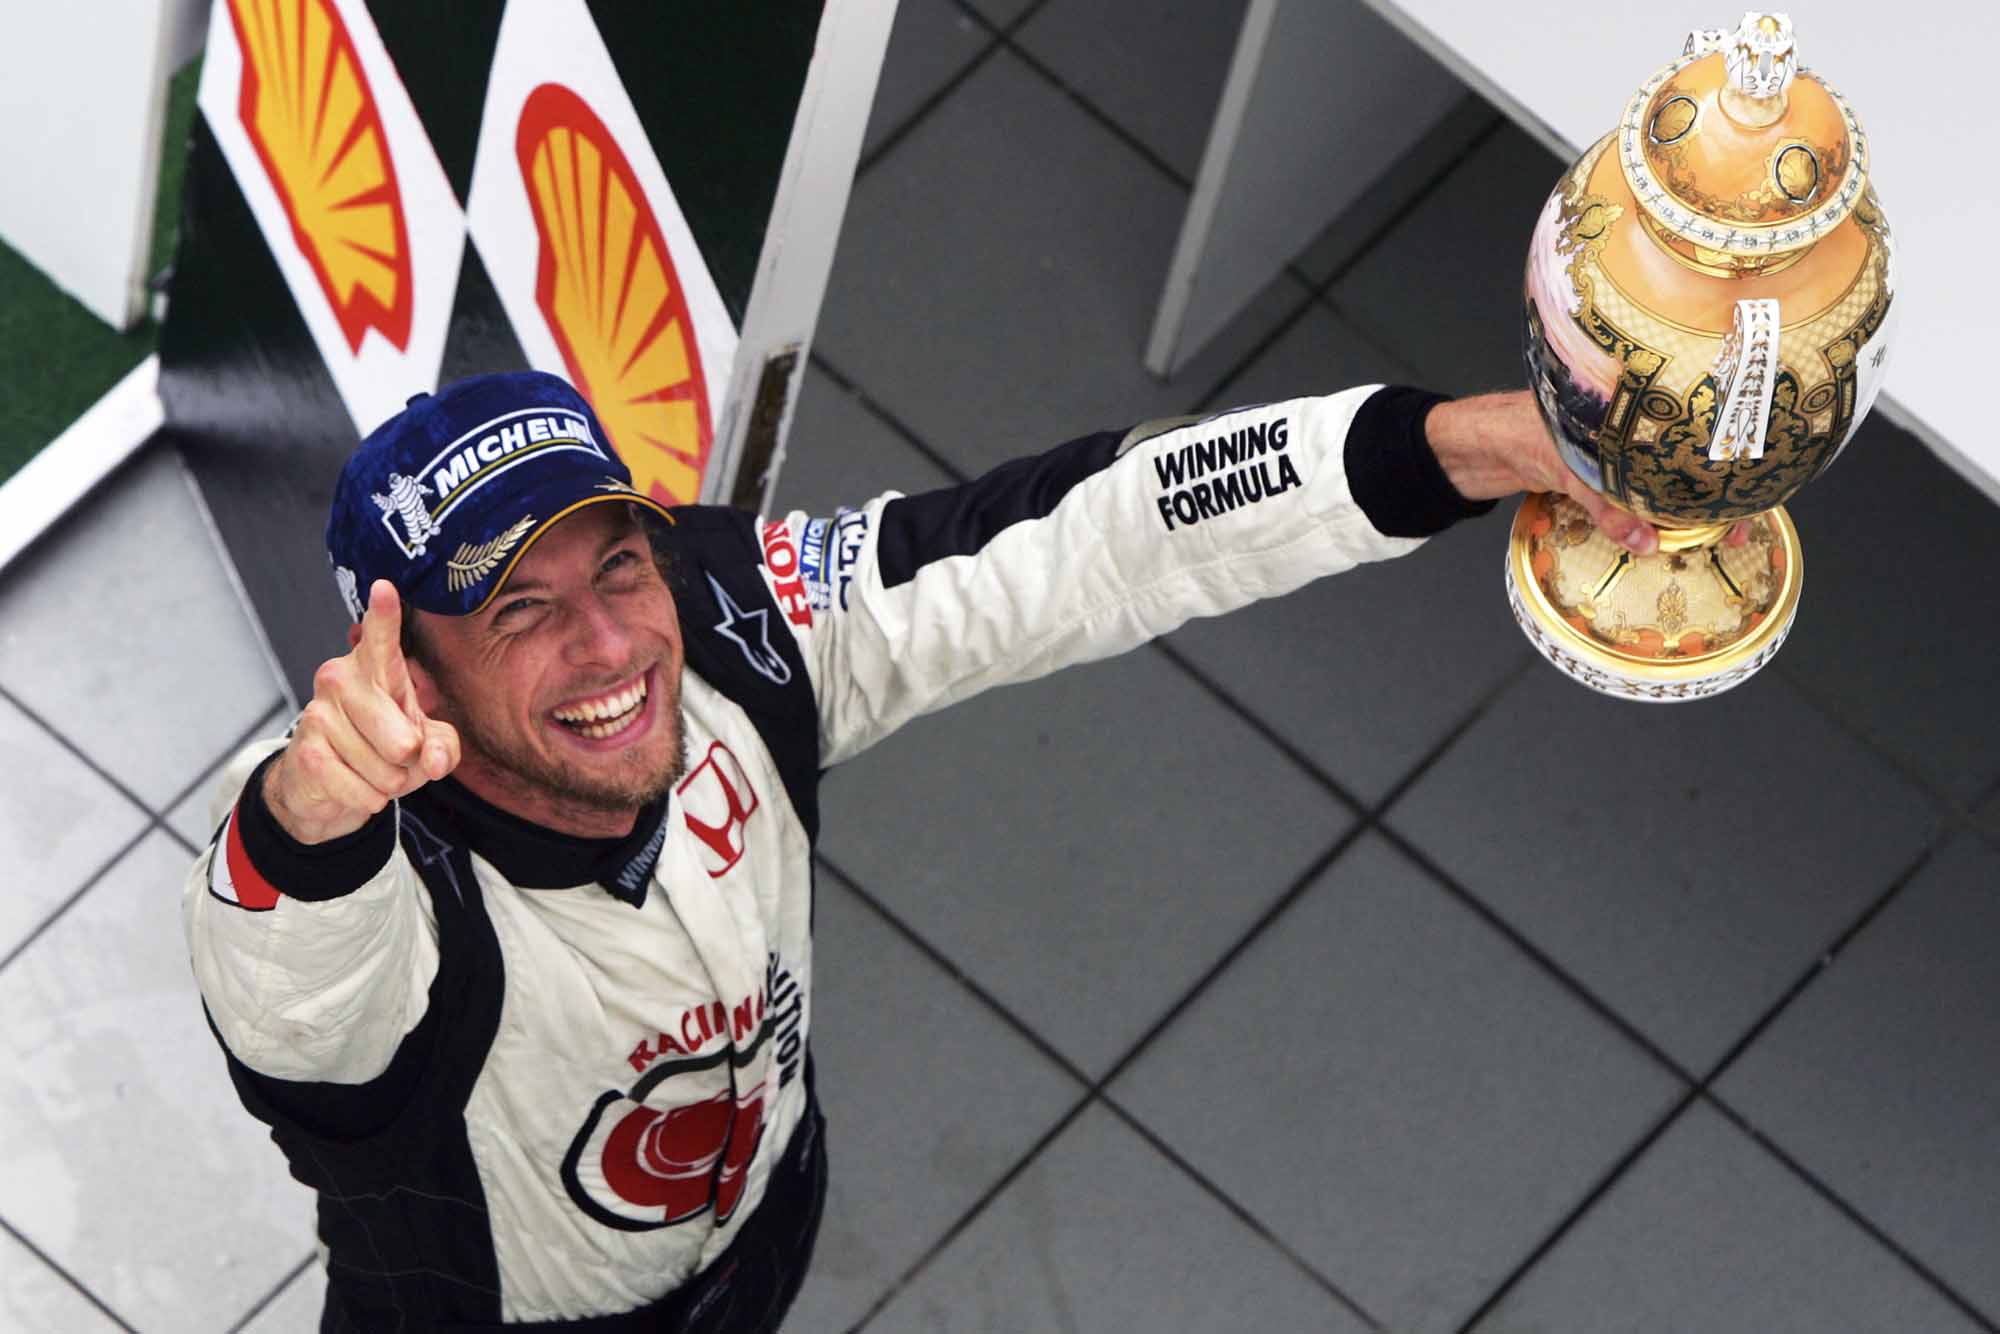 Jenson Button jubilantly holds his trophy aloft after winning 2006 Hungarian Grand Prix